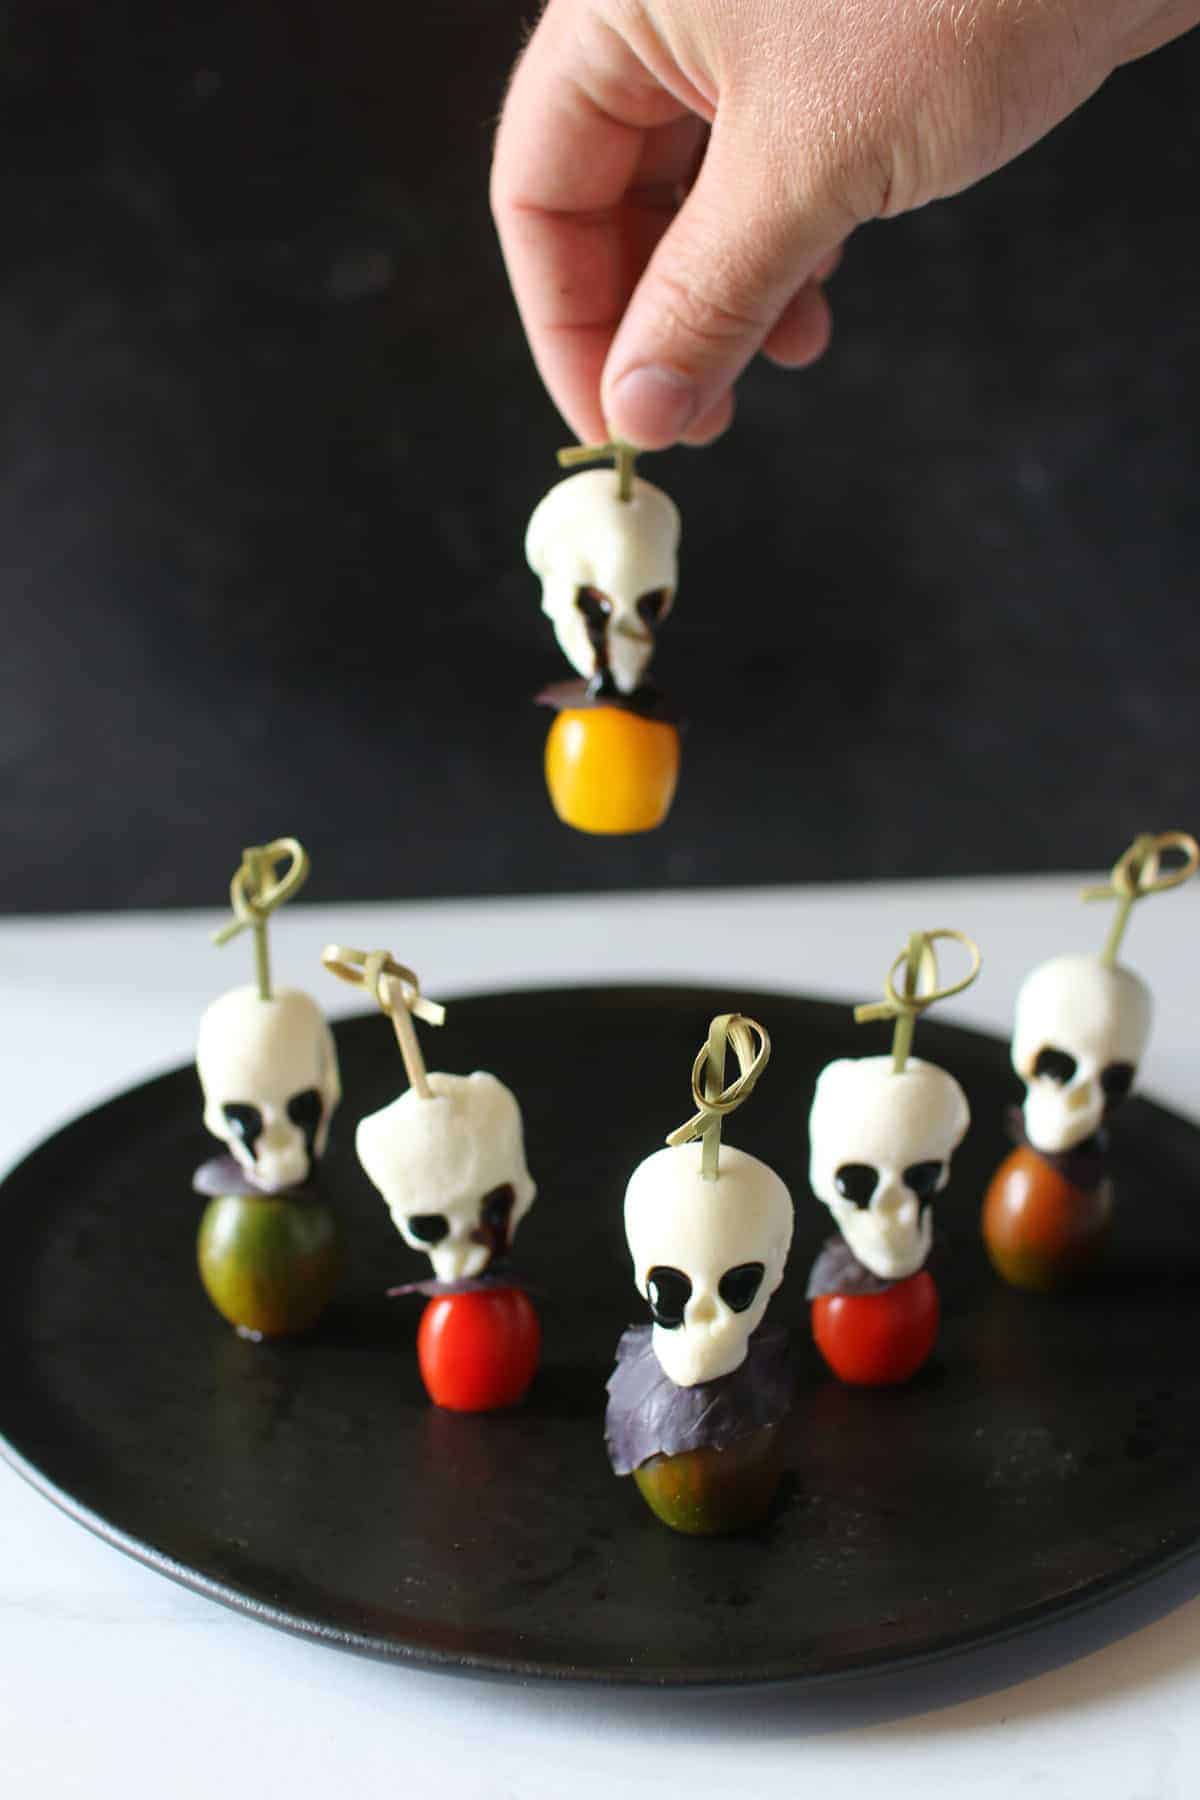 6 Halloween Caprese Skewers sit on a black plate with a hand picking up a skewer in the background. Each skewer consists of a bamboo skewer with a knot at the top, then a piece of skull shaped mozzarella with goo-ing black eyes of balsamic glaze, a piece of purple basil and then a colorful cherry tomato.